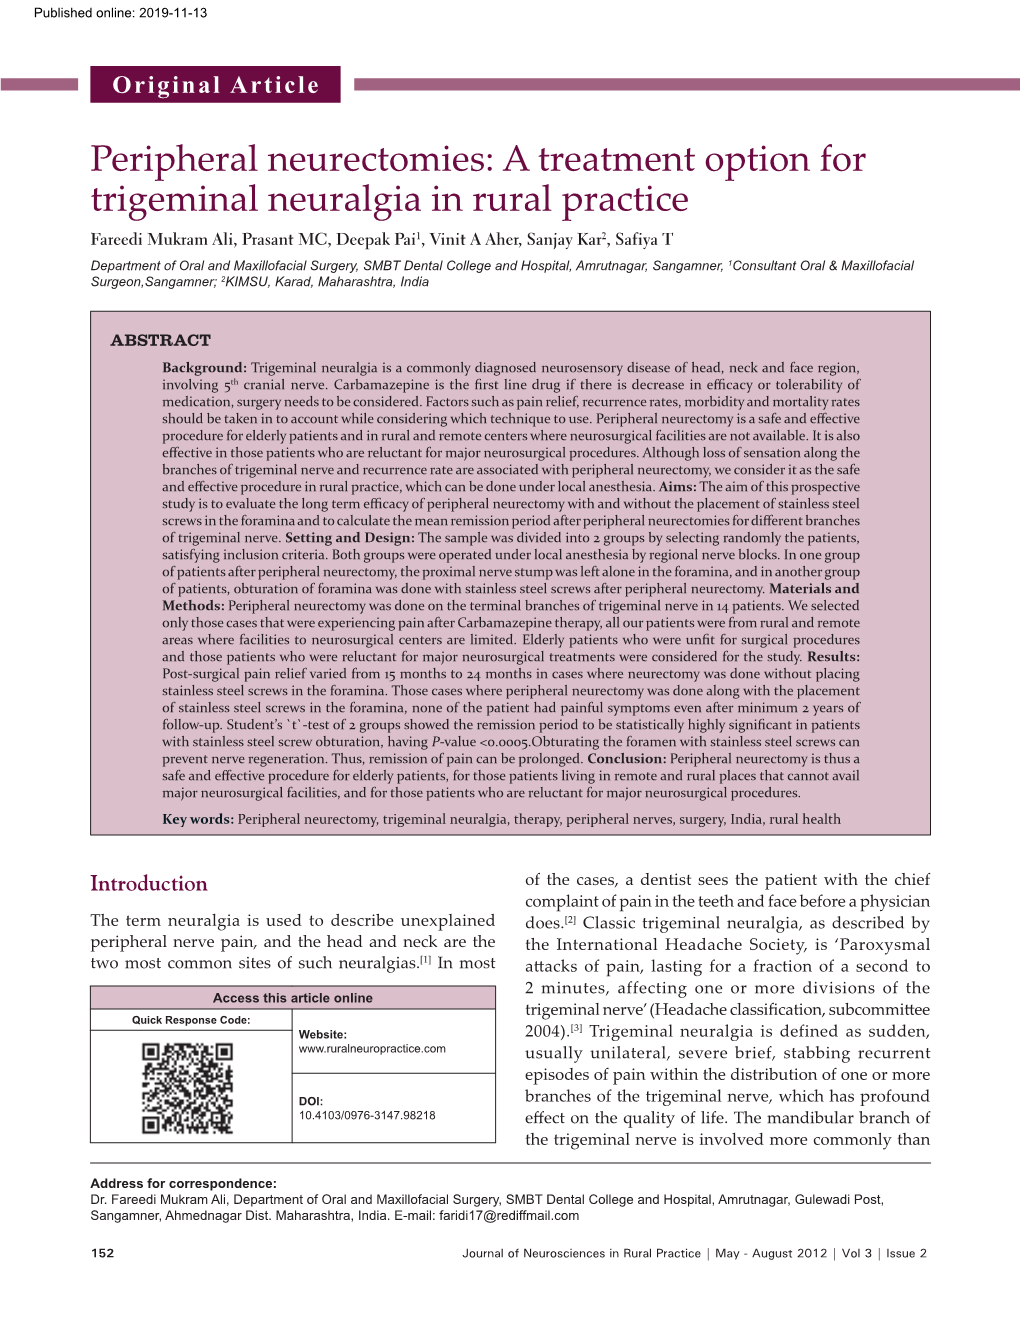 Peripheral Neurectomies: a Treatment Option for Trigeminal Neuralgia in Rural Practice